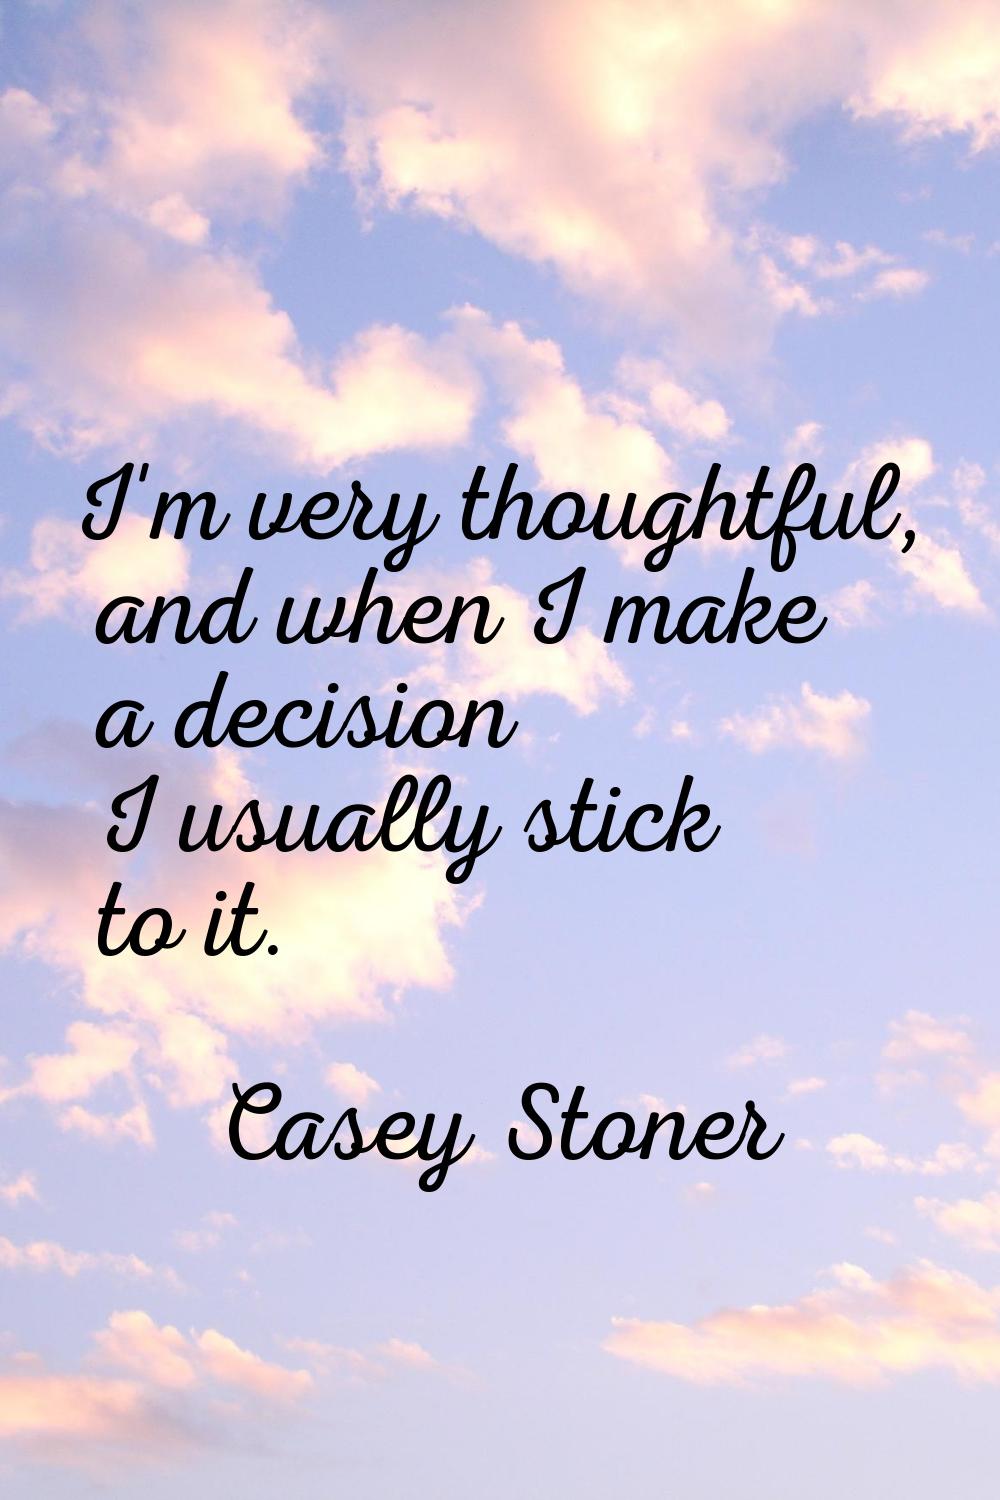 I'm very thoughtful, and when I make a decision I usually stick to it.